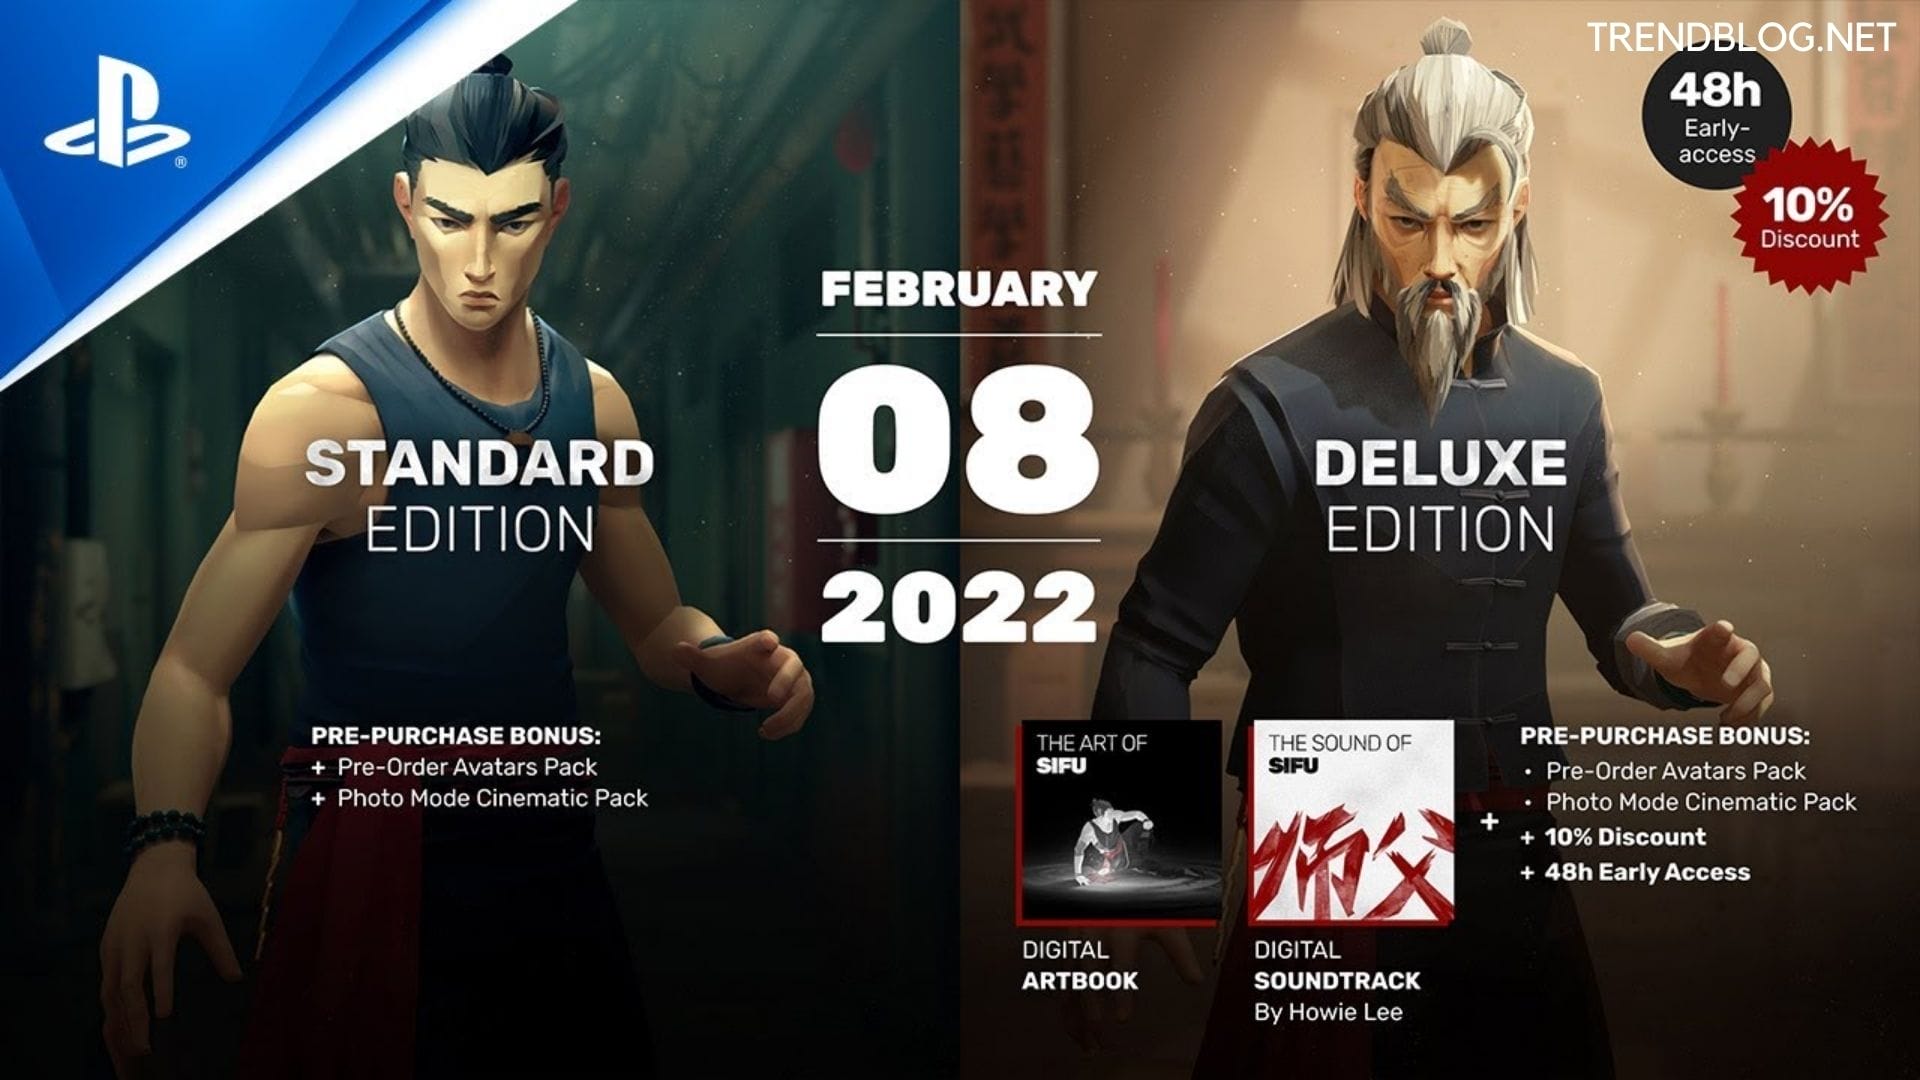  Sifu PC Game 2022: When Will You Get Your Hands on It?